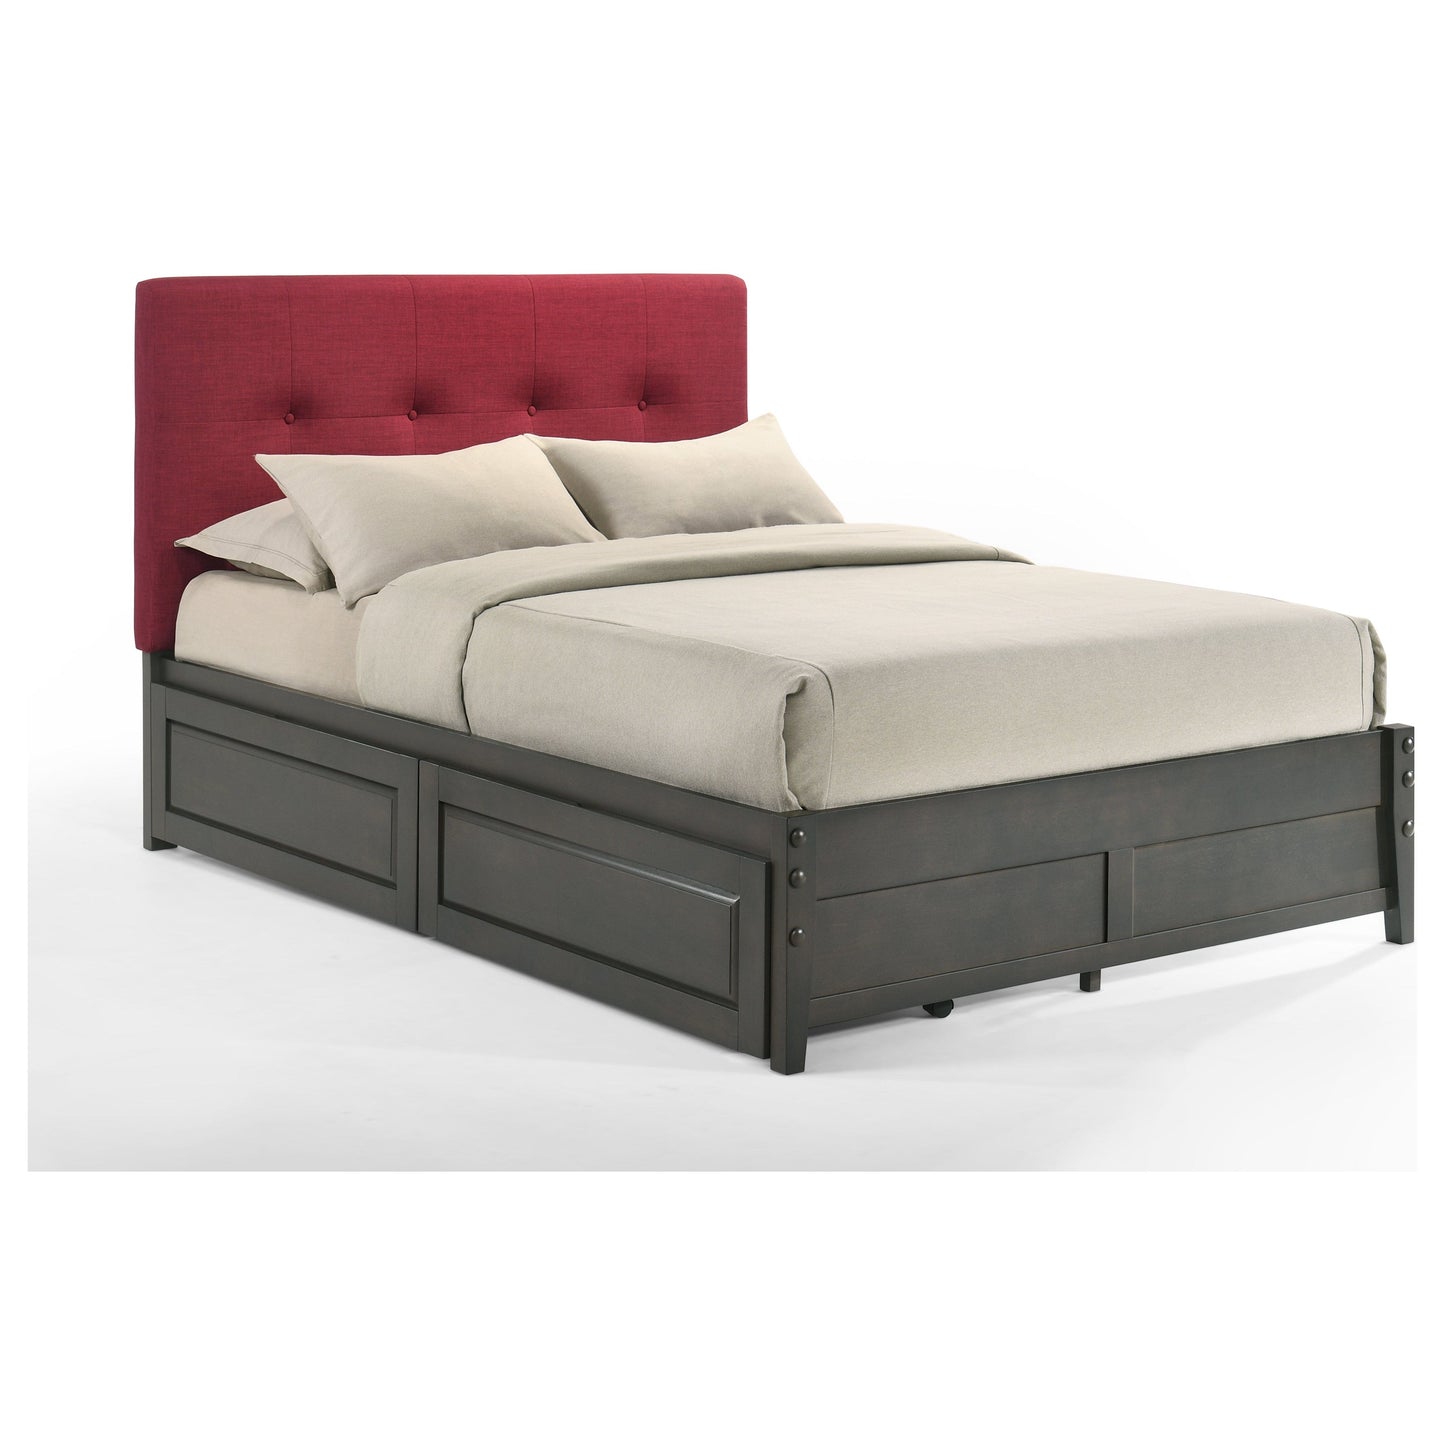 Night and Day Paprika Full Bed in Red with Stonewash Finish Frame (K Series)